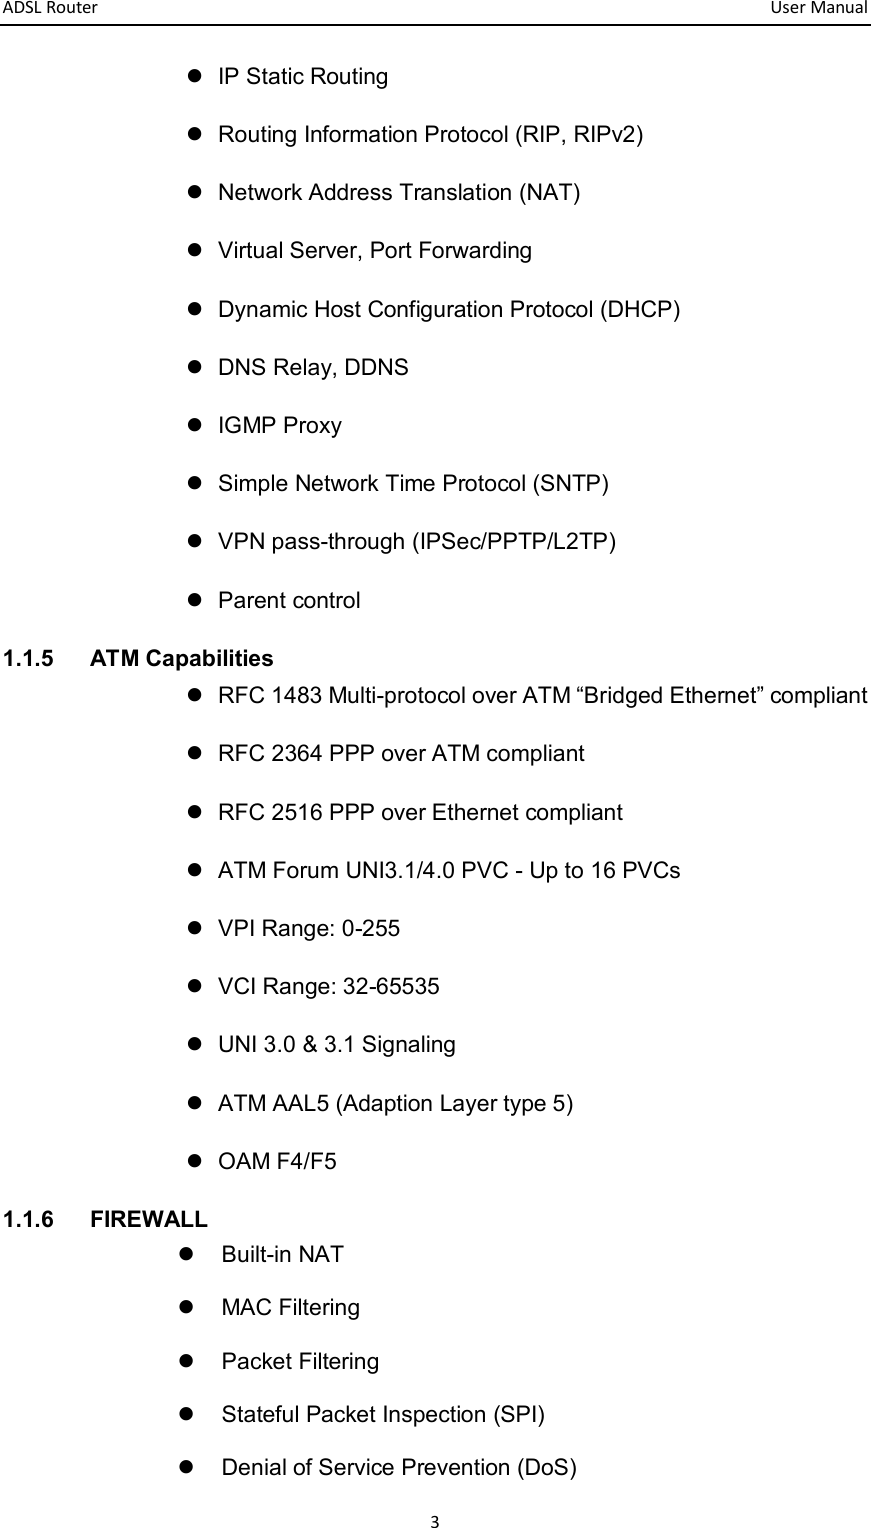 ADSL Router       User Manual 3   IP Static Routing   Routing Information Protocol (RIP, RIPv2)   Network Address Translation (NAT)   Virtual Server, Port Forwarding   Dynamic Host Configuration Protocol (DHCP)   DNS Relay, DDNS   IGMP Proxy   Simple Network Time Protocol (SNTP)   VPN pass-through (IPSec/PPTP/L2TP)   Parent control 1.1.5  ATM Capabilities   RFC 1483 Multi-protocol over ATM “Bridged Ethernet” compliant   RFC 2364 PPP over ATM compliant   RFC 2516 PPP over Ethernet compliant     ATM Forum UNI3.1/4.0 PVC - Up to 16 PVCs   VPI Range: 0-255   VCI Range: 32-65535   UNI 3.0 &amp; 3.1 Signaling     ATM AAL5 (Adaption Layer type 5)     OAM F4/F5 1.1.6  FIREWALL   Built-in NAT   MAC Filtering   Packet Filtering   Stateful Packet Inspection (SPI)   Denial of Service Prevention (DoS) 